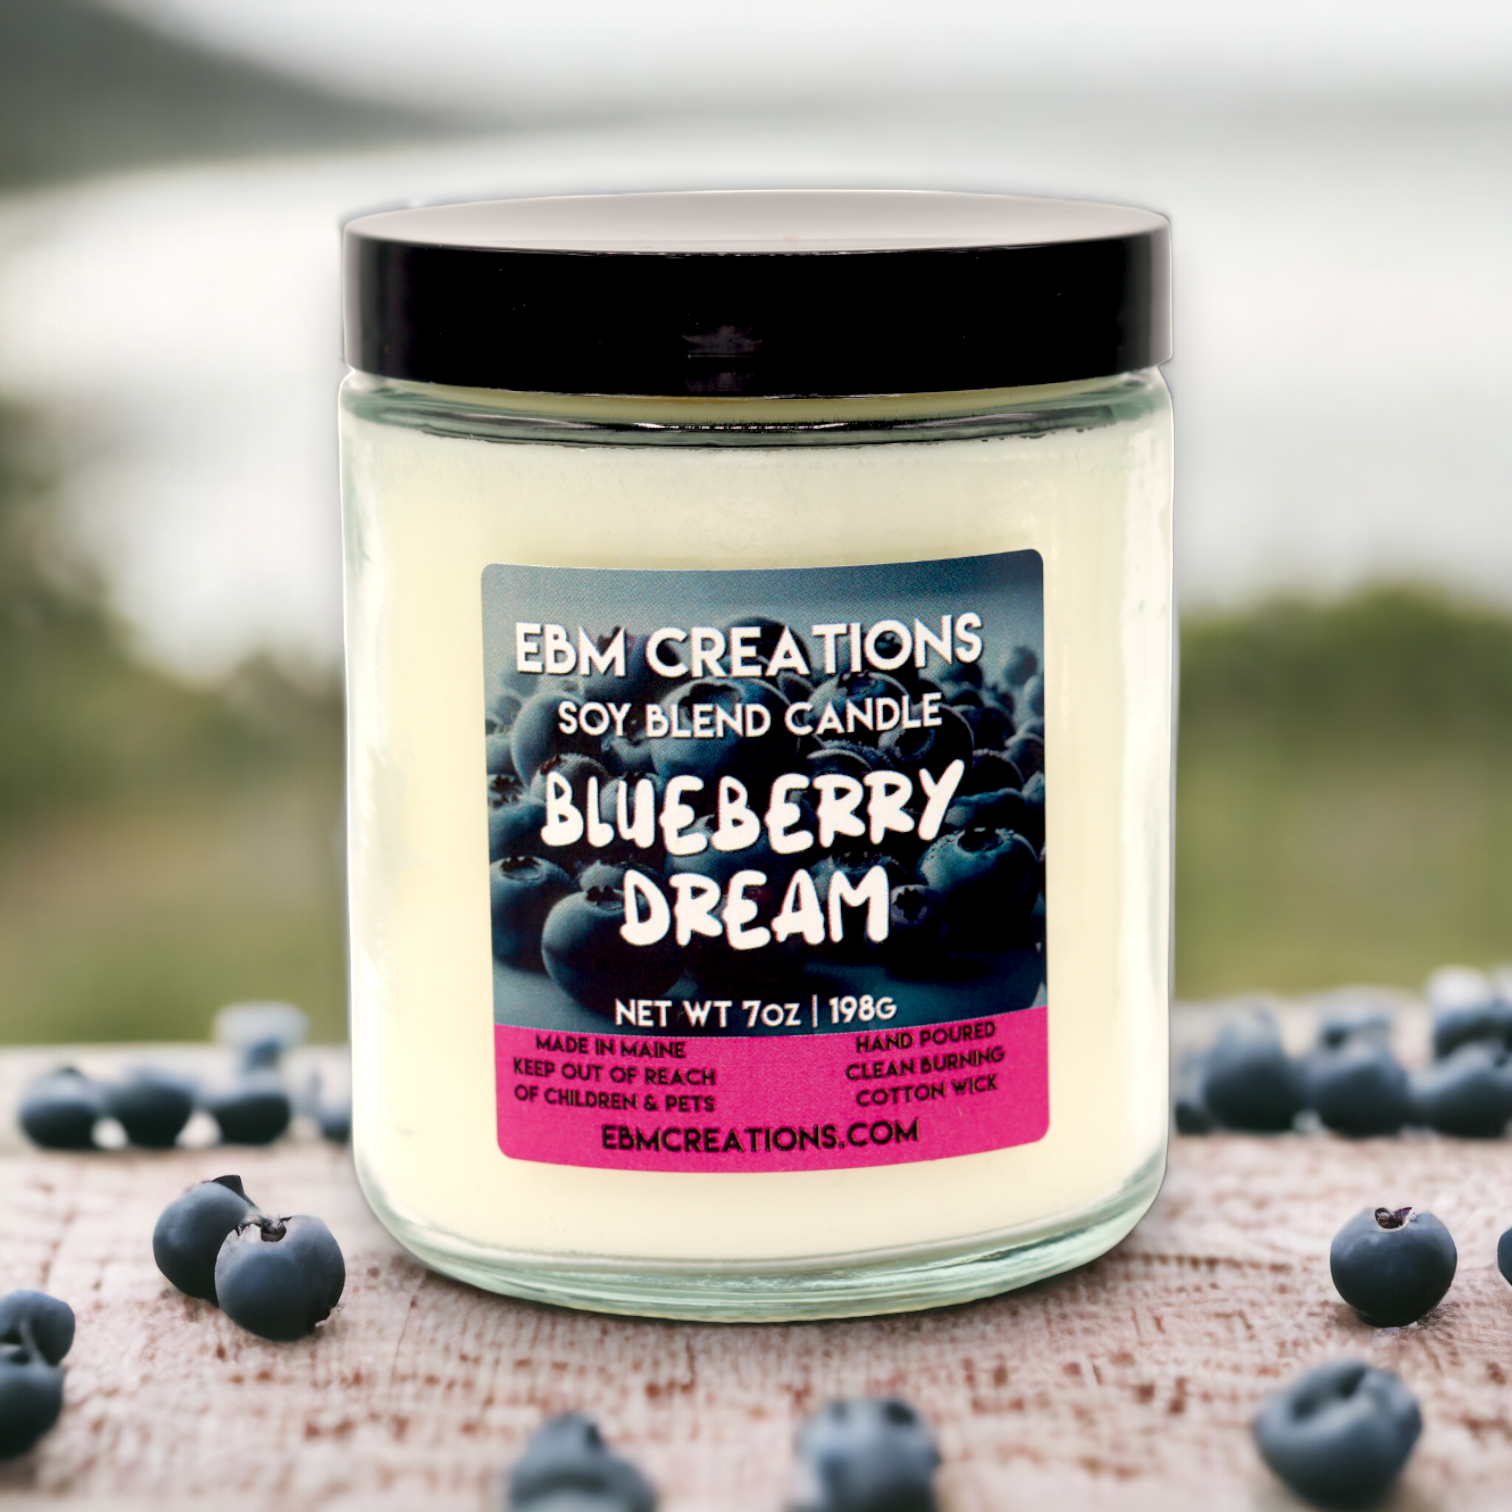 Blueberry Dream - 7oz  Soy Blend Candle